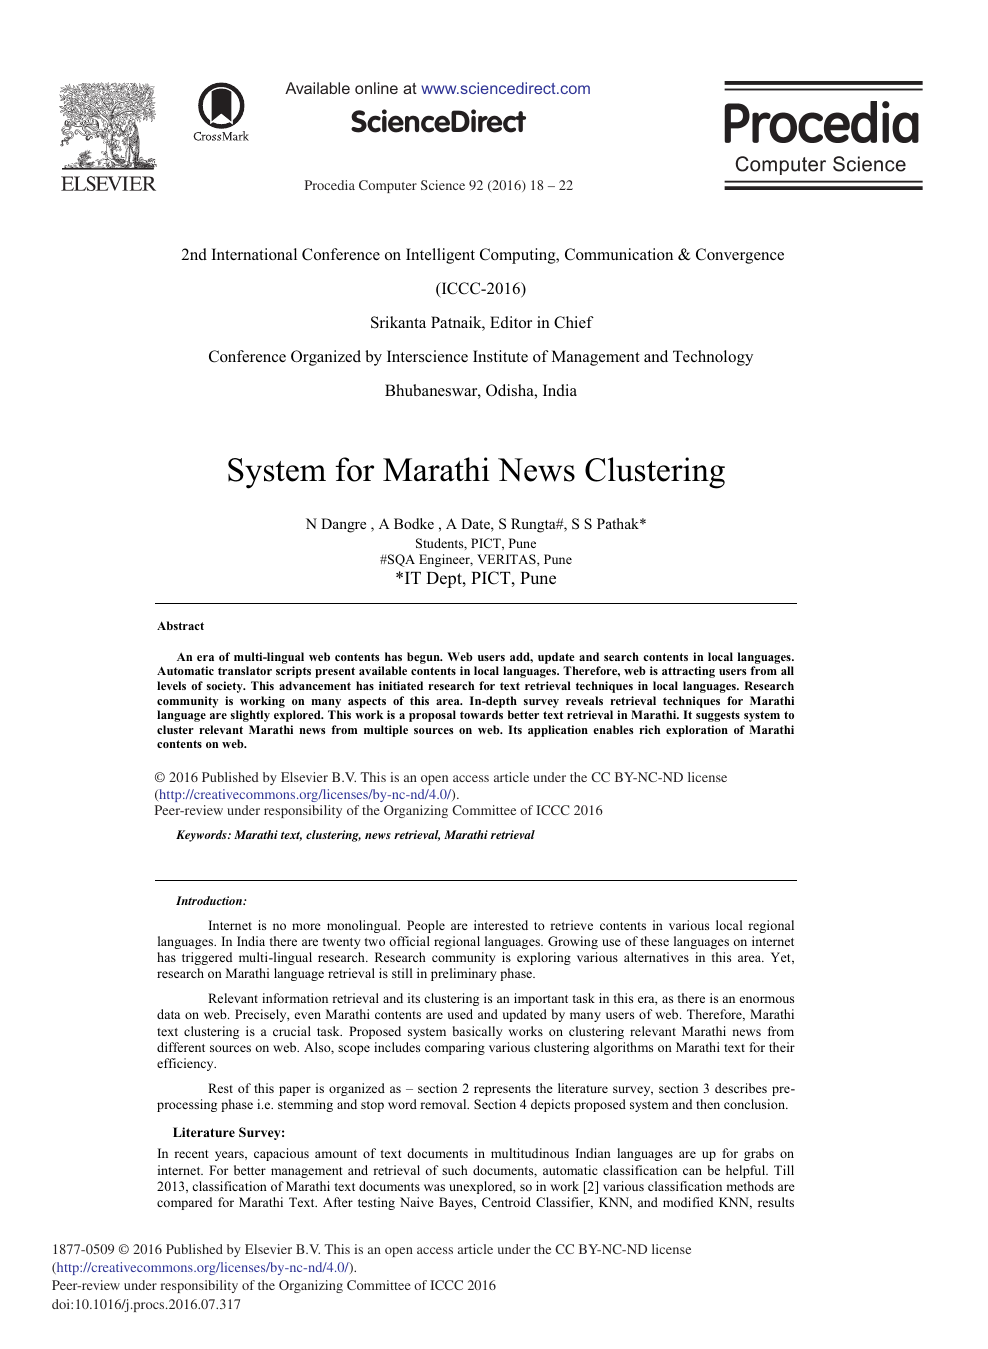 System For Marathi News Clustering Topic Of Research Paper In